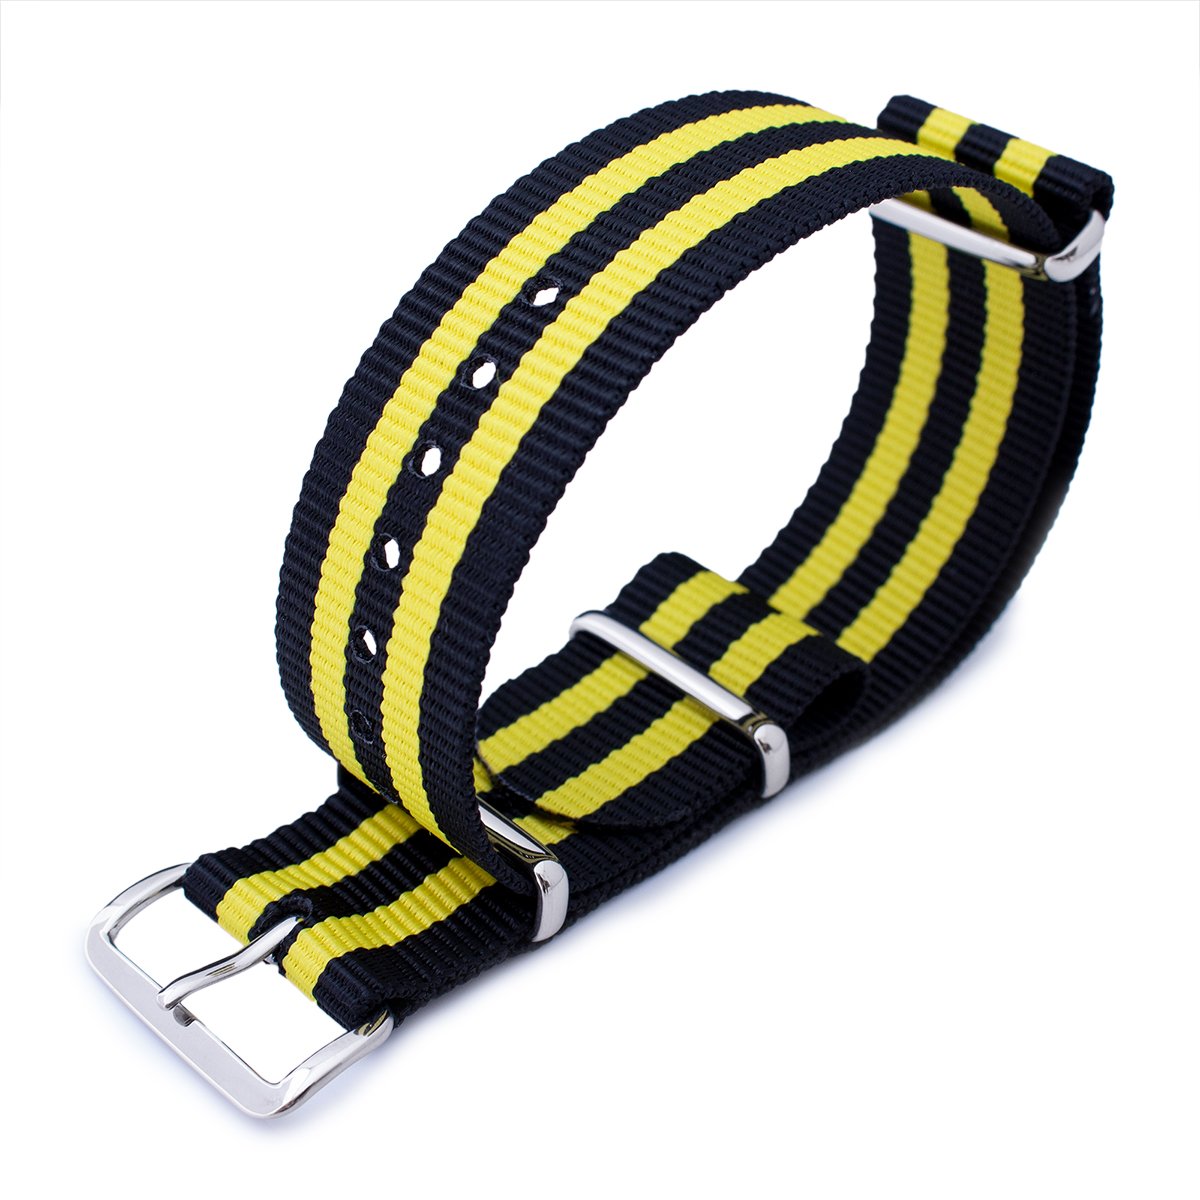 MiLTAT 20mm or 22mm G10 military watch strap ballistic nylon armband Polished Black & Yellow Strapcode Watch Bands